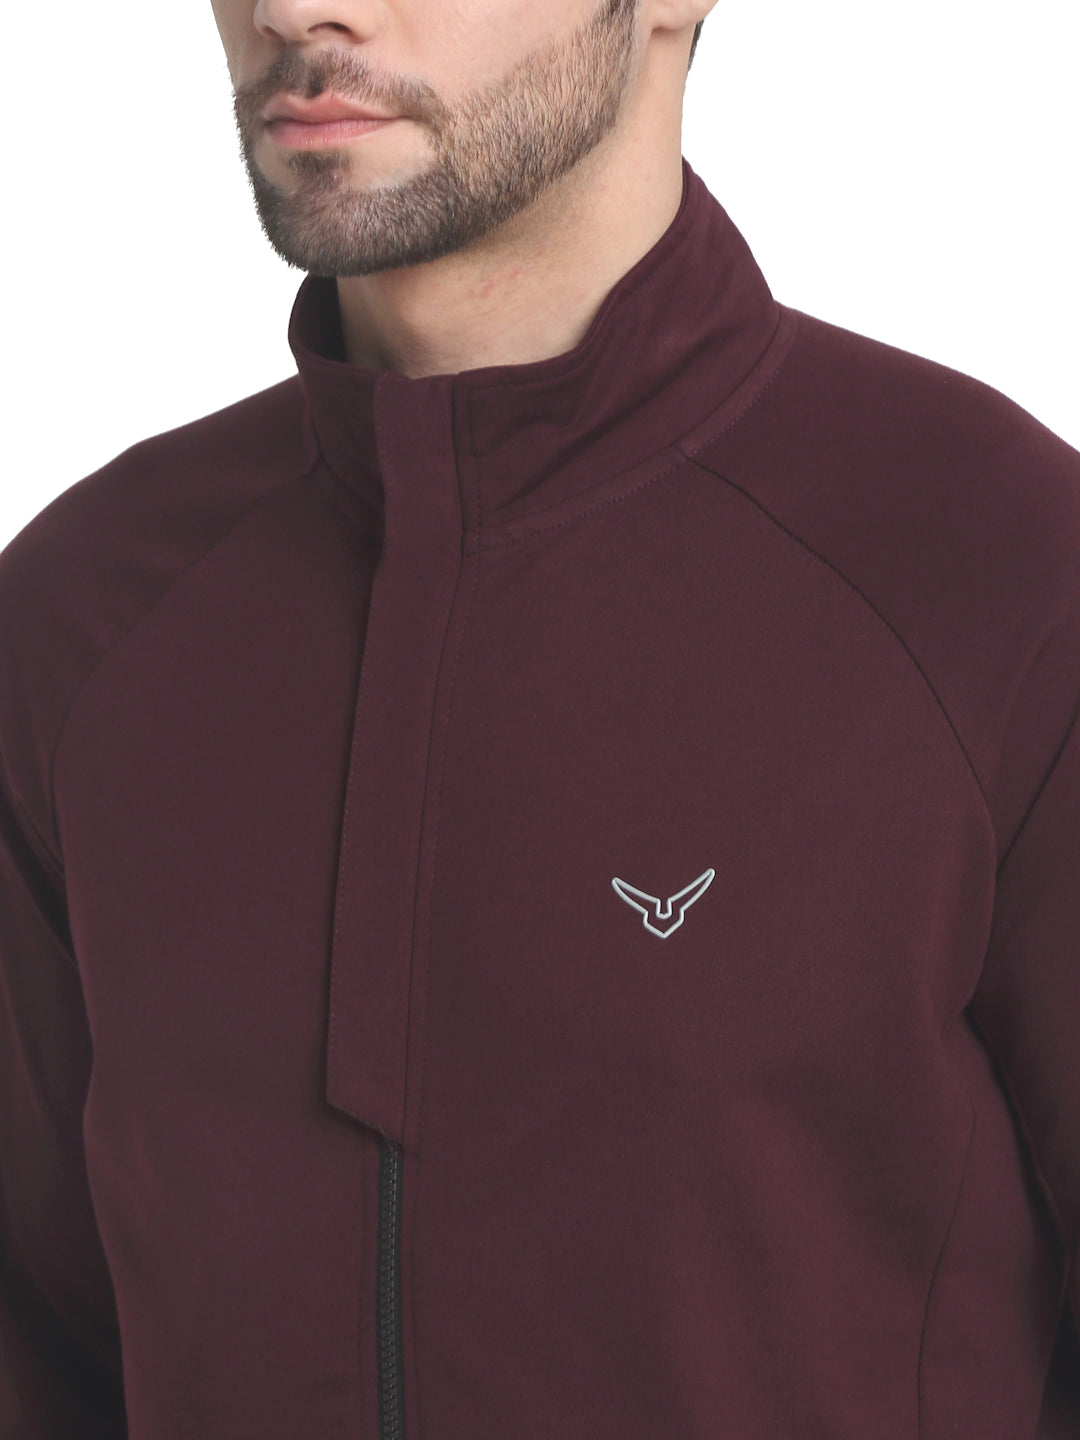 Invincible Men's Light Weight Lounge Tracksuit